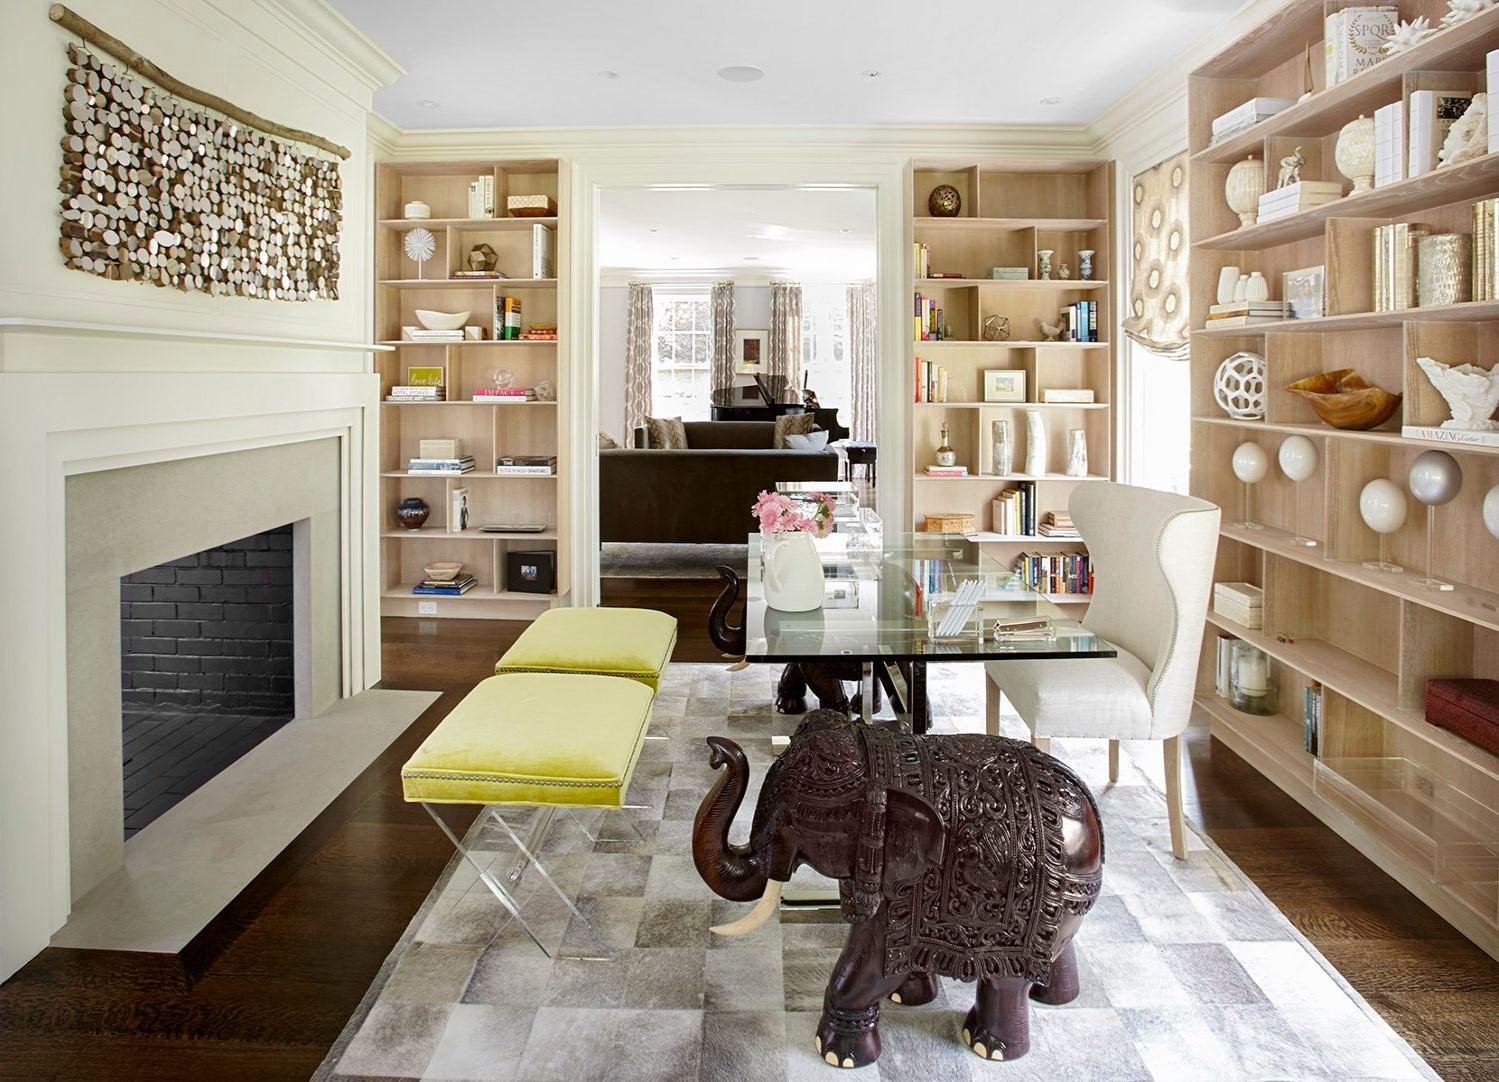 Sitting Room With Fireplace and Rosewood Elephant